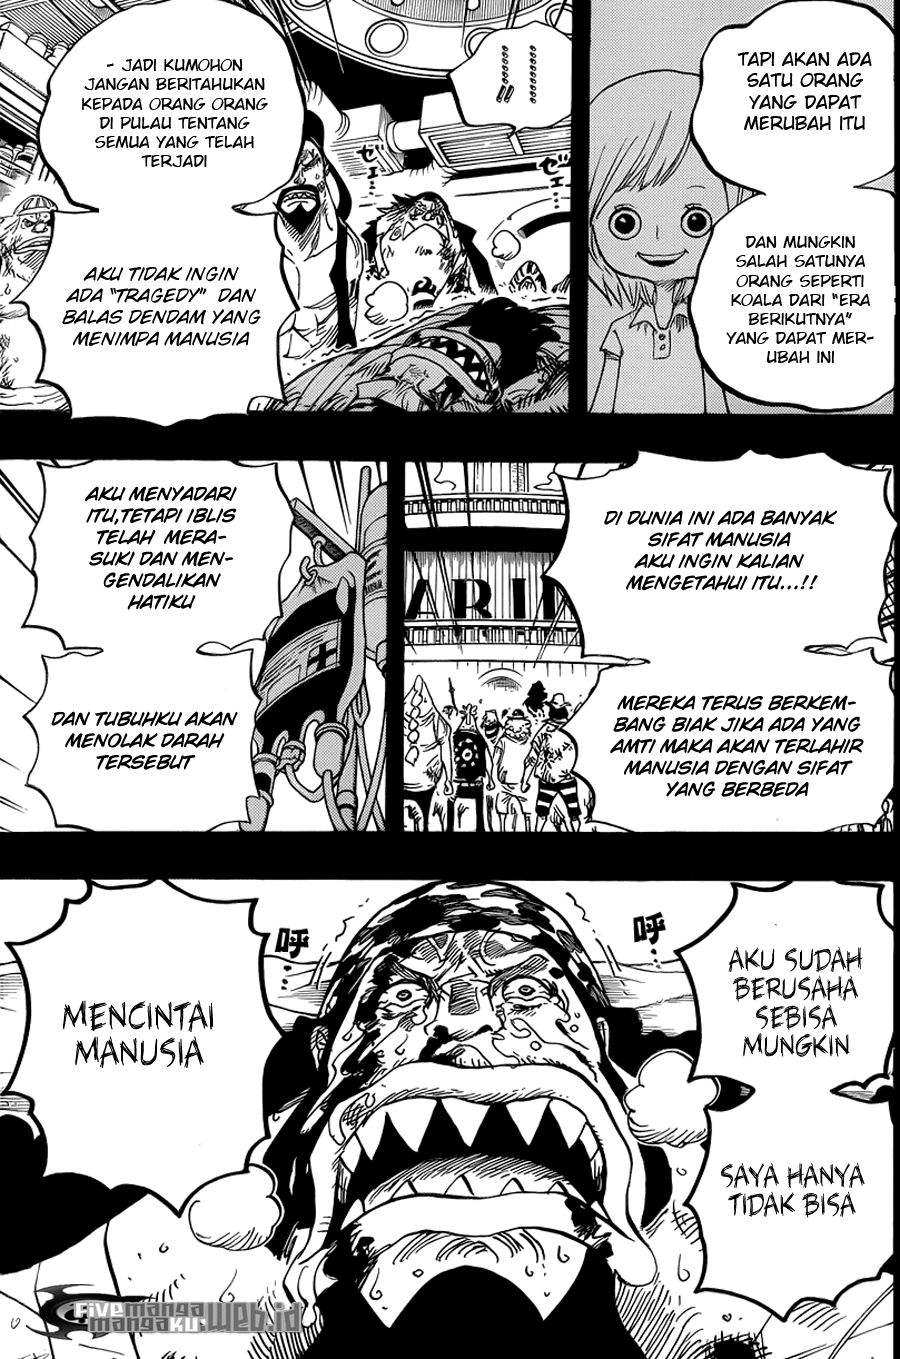 One Piece Chapter 623 – si bajak laut fisher tiger Image 16